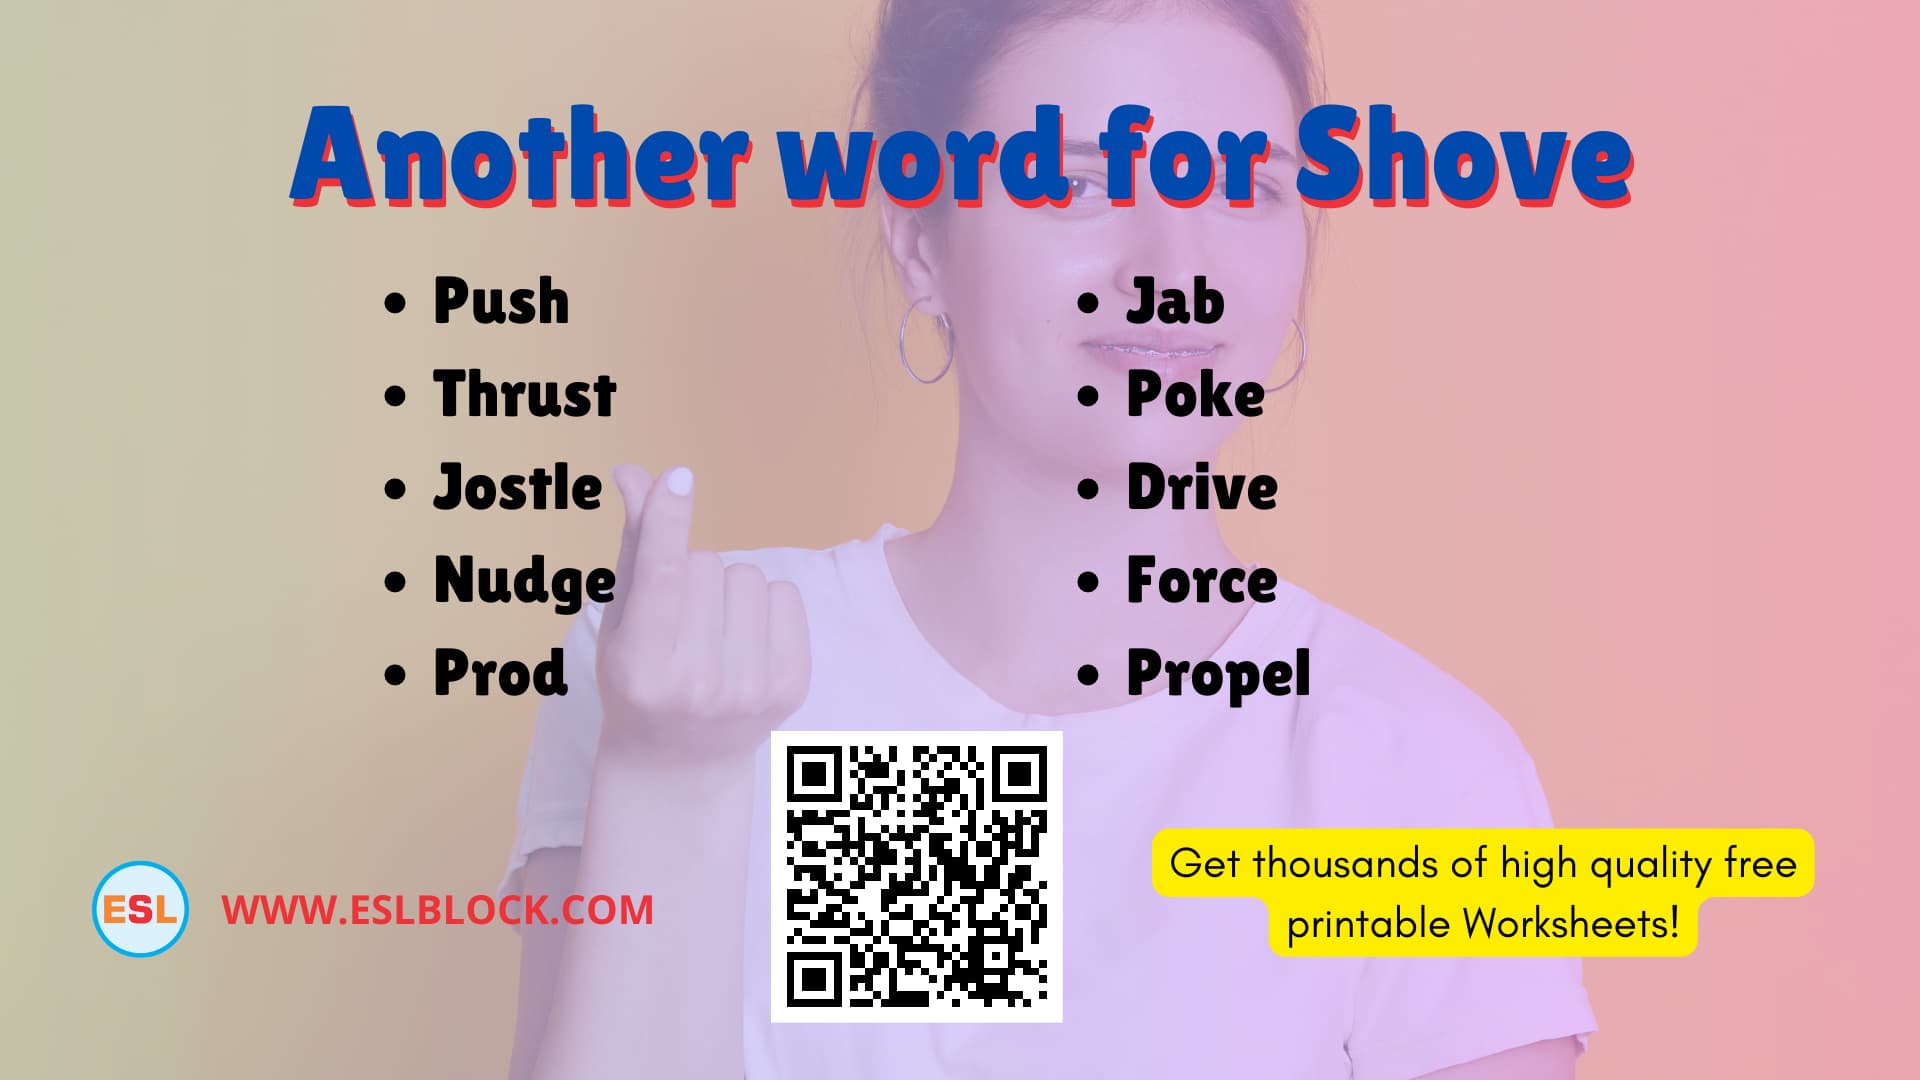 What is another word for Shove